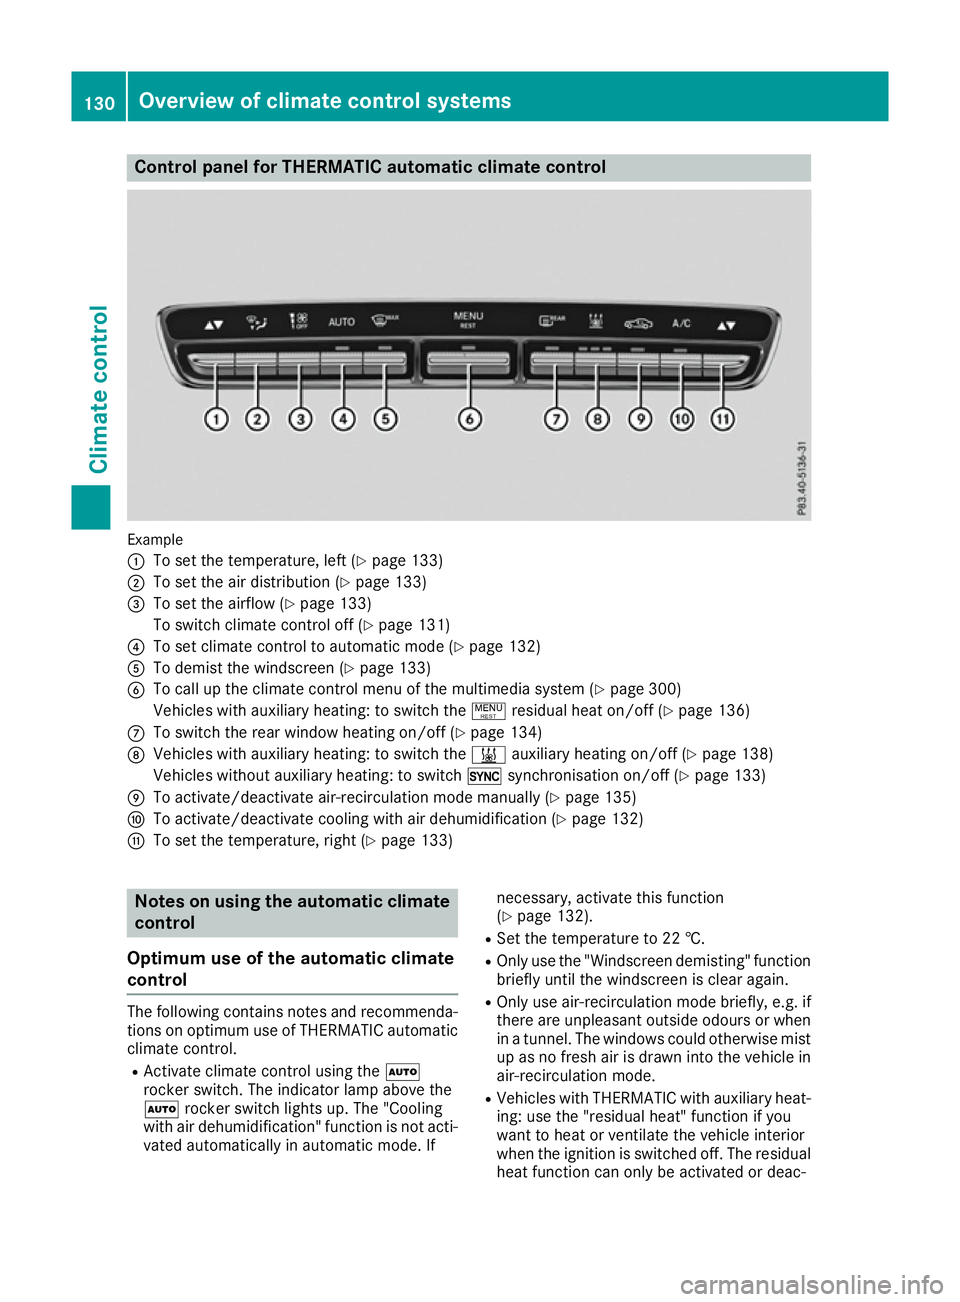 MERCEDES-BENZ C-CLASS COUPE 2015  Owners Manual Control panel for THERMATIC automatic climat
econtrol Example
:
To set th etem perature, left (Y page 133)
; To set th eair distribution (Y page 133)
= To set th eairflow (Y page 133)
To switch climat